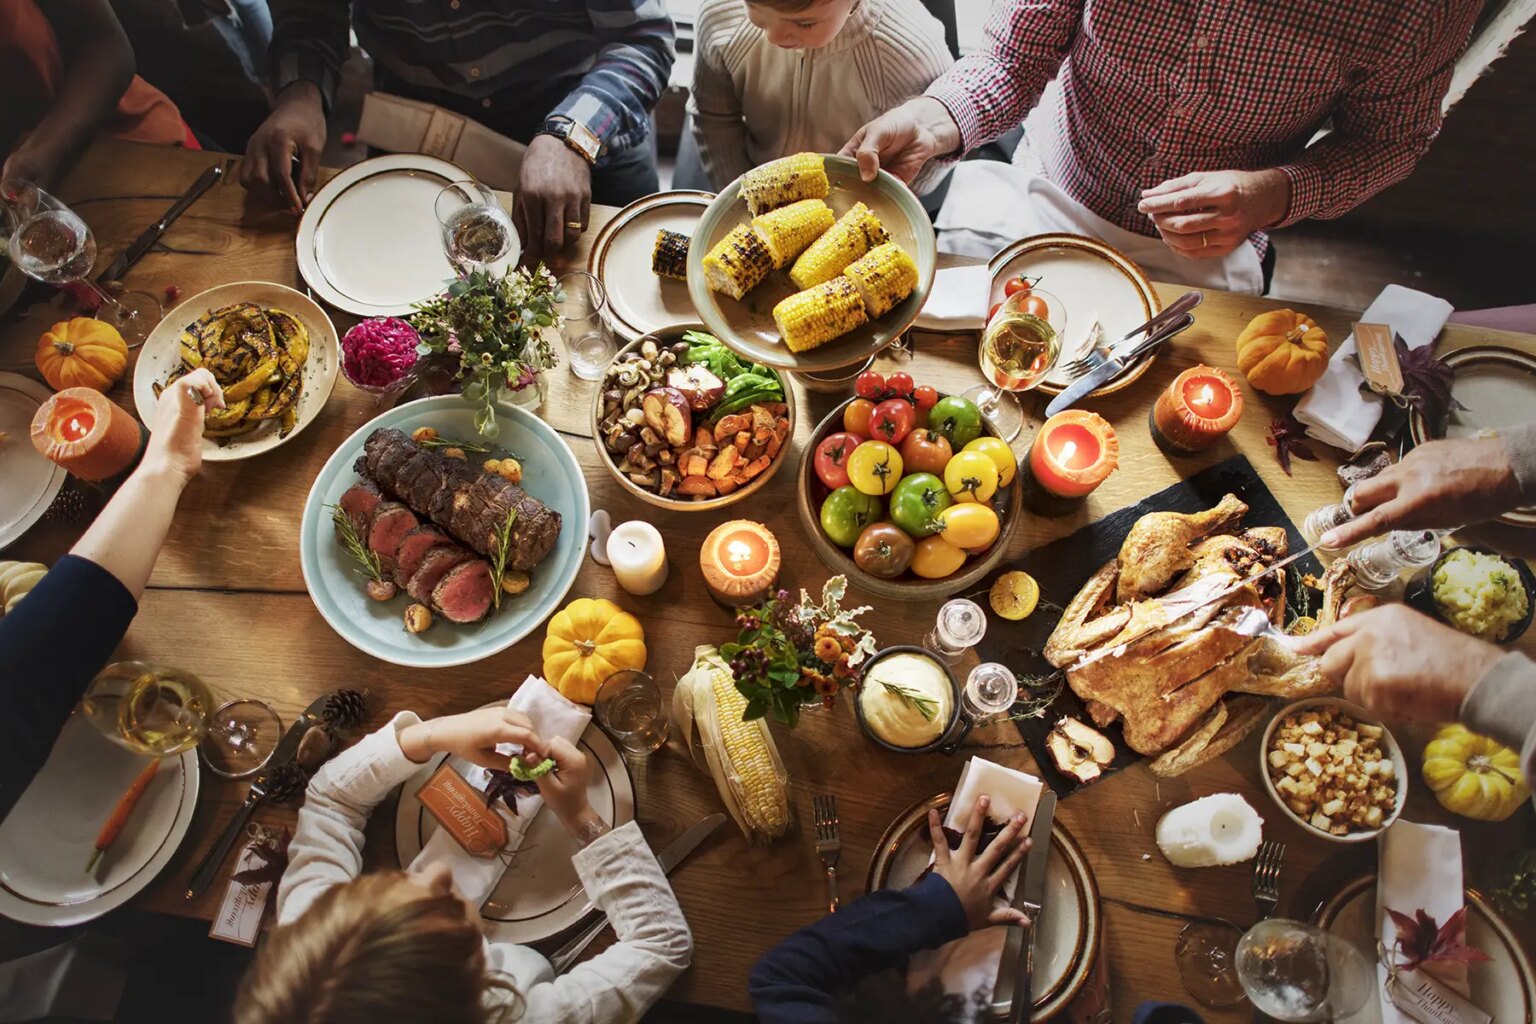 Planning a Thanksgiving meal abroad